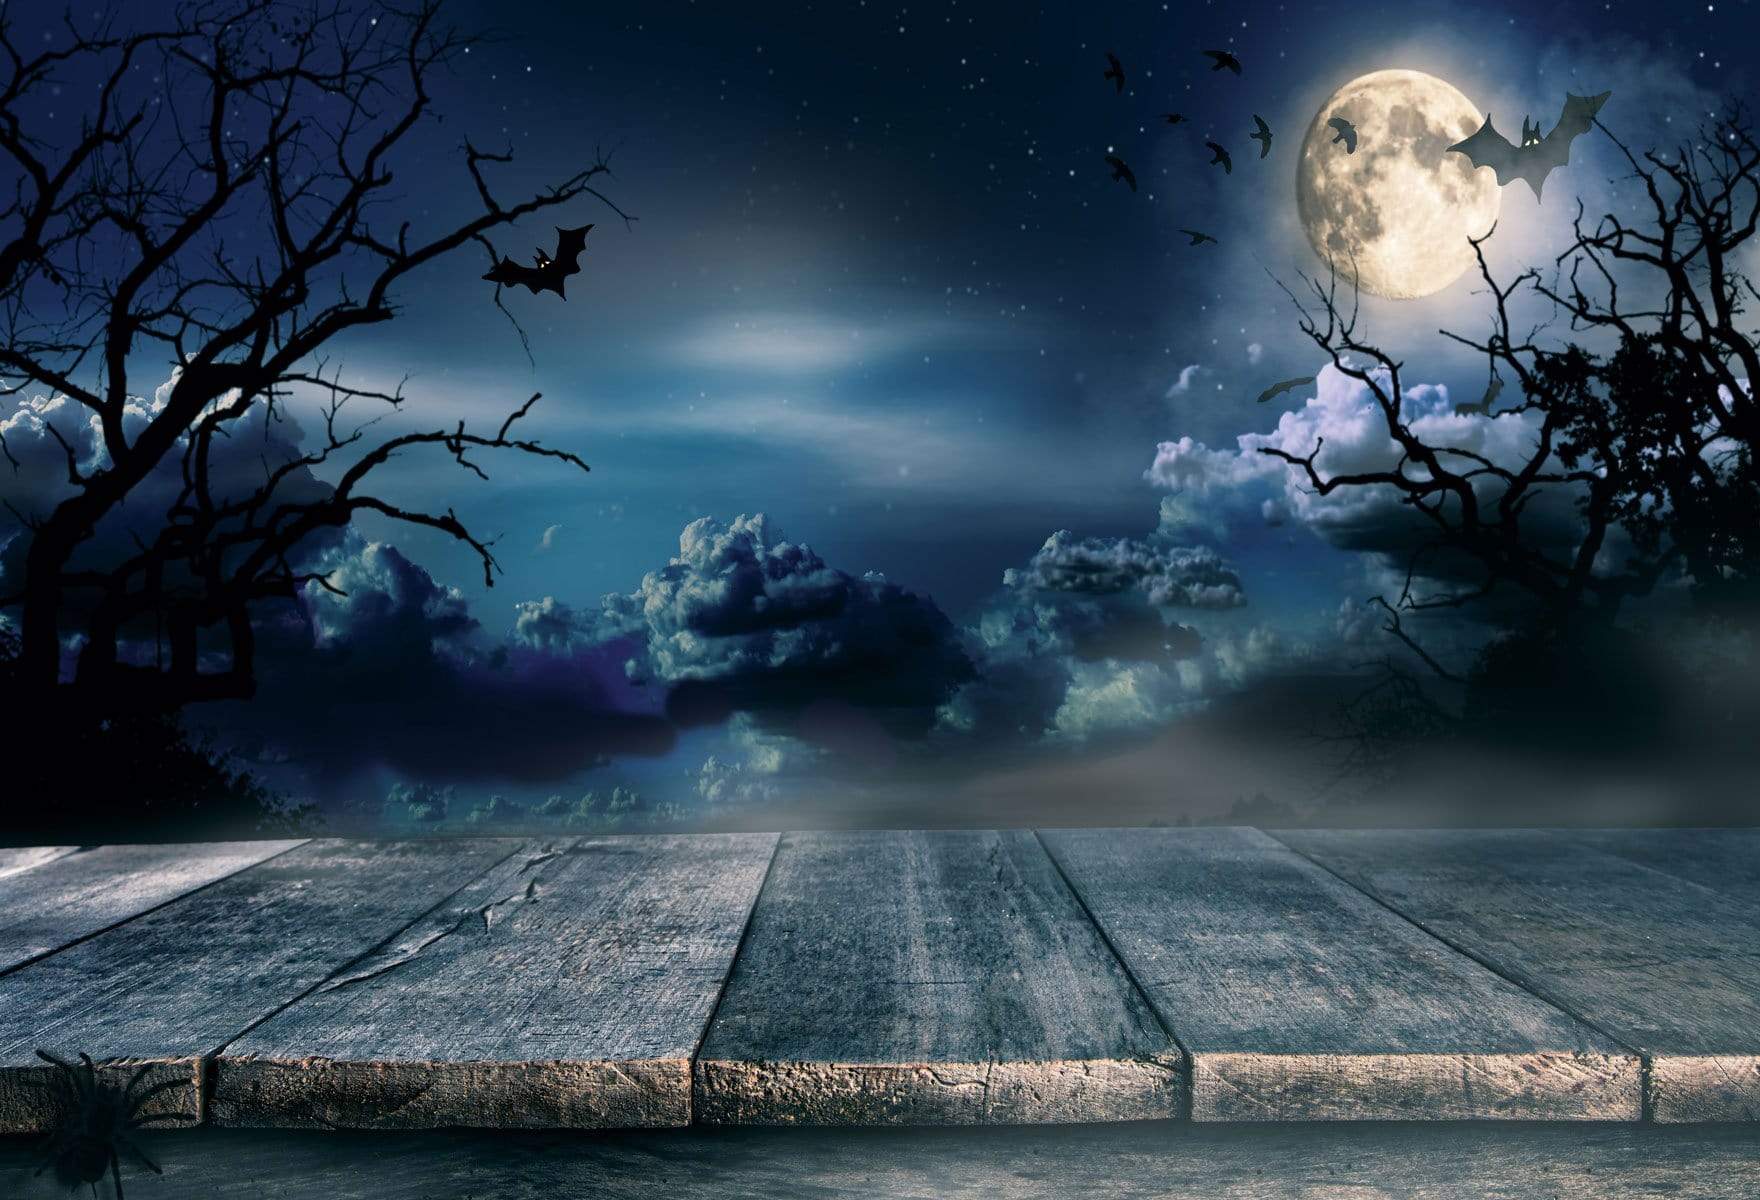 Kate Night Sky Black clouds  Moon  Crow for Pictures